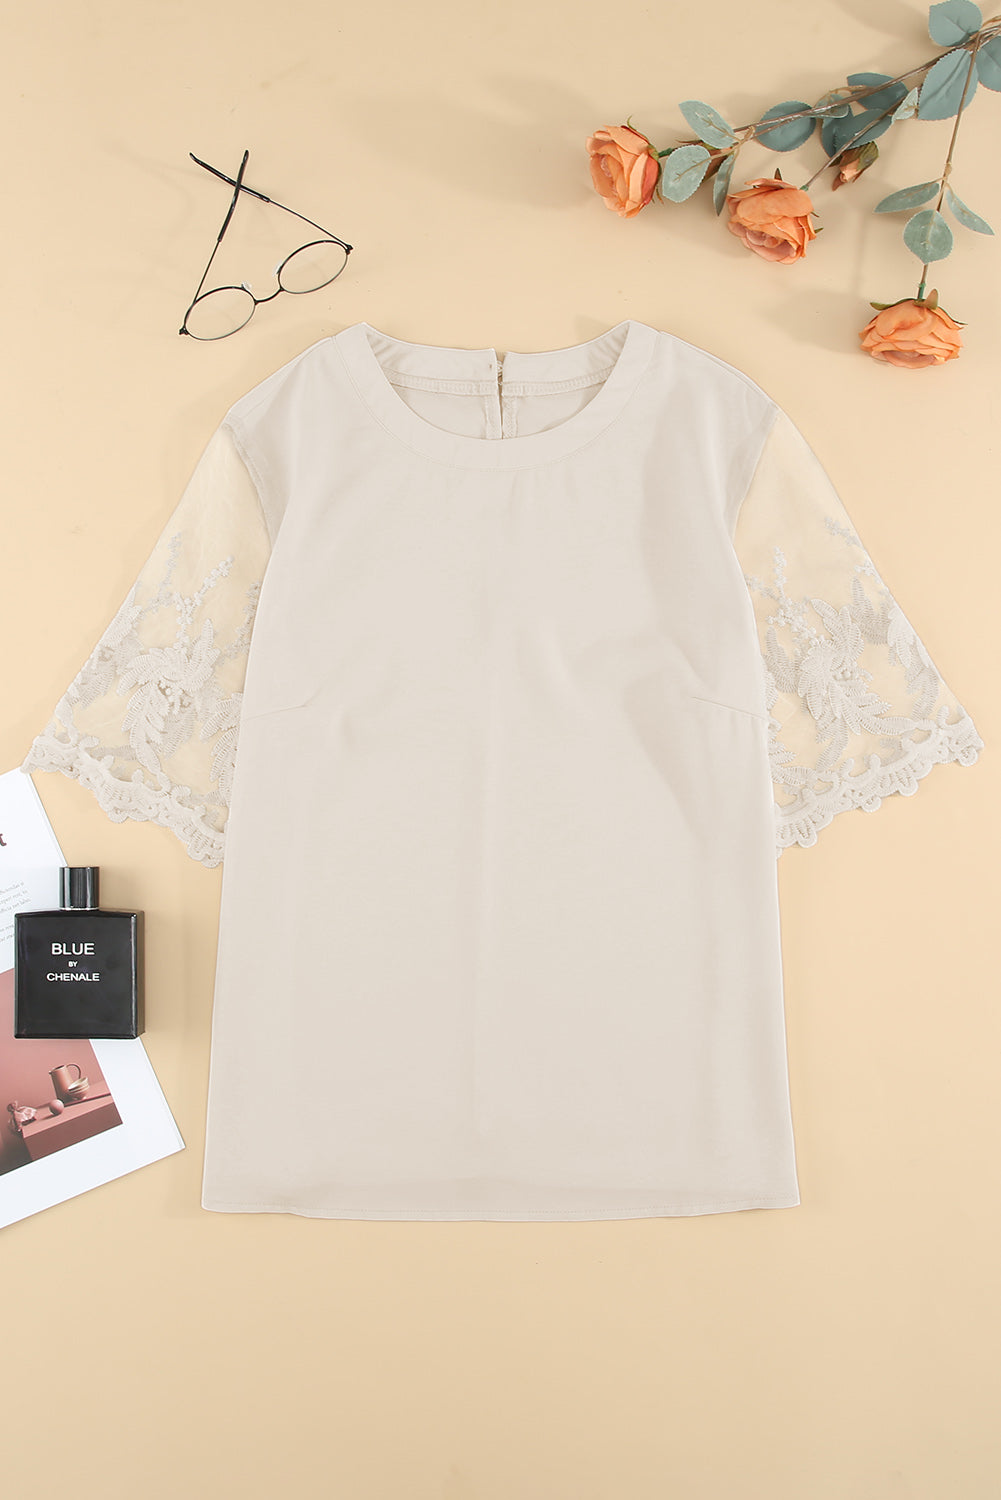 Chic White Floral Lace Short Sleeve Top